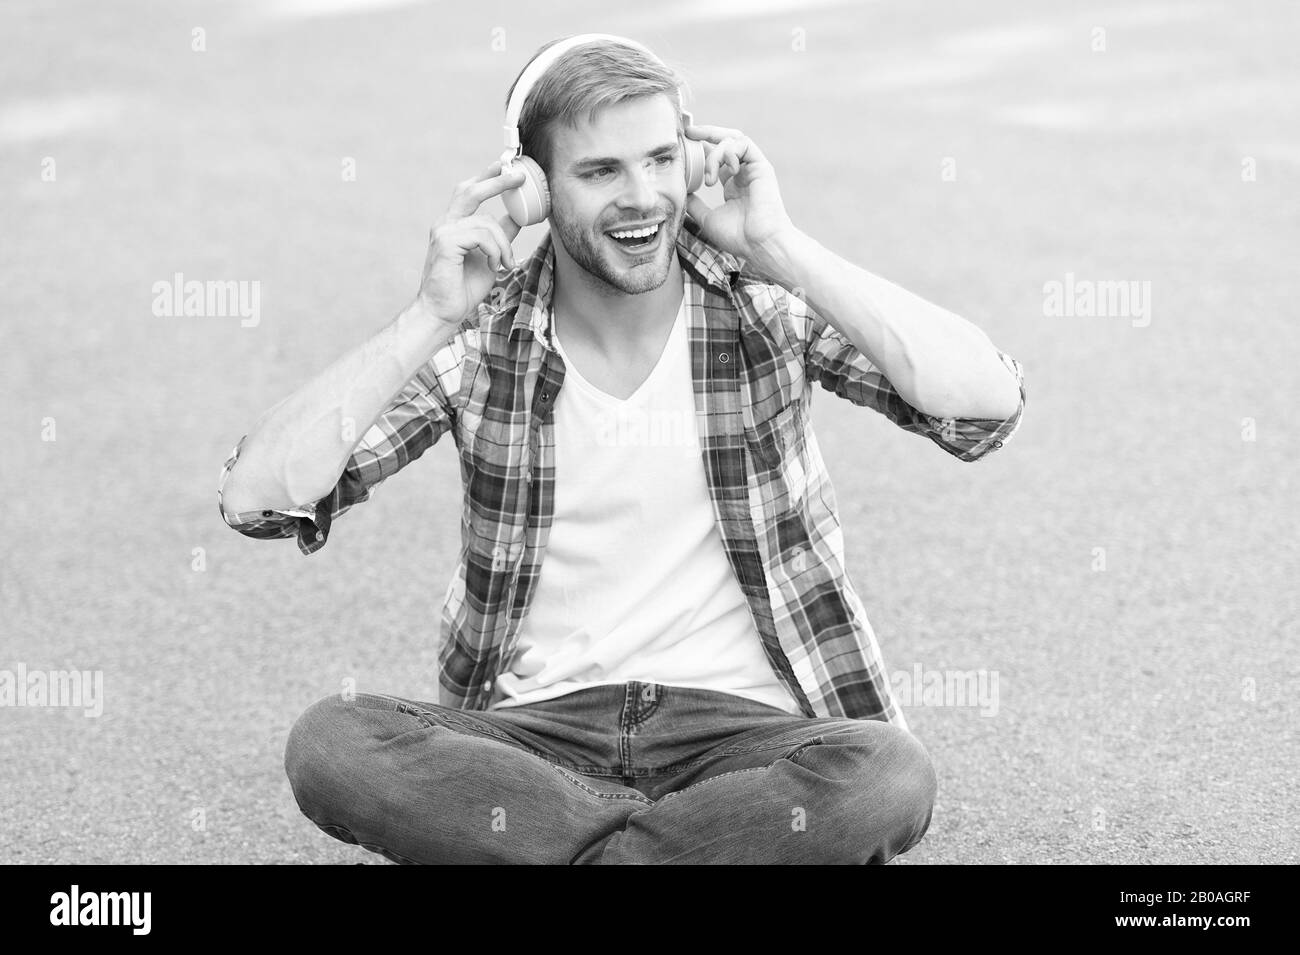 Worldwide knowledge access. Audio library. Another way of learning. Man handsome college student headphones. Online learning. Educational technology. E learning. Study anywhere. Audio book concept. Stock Photo